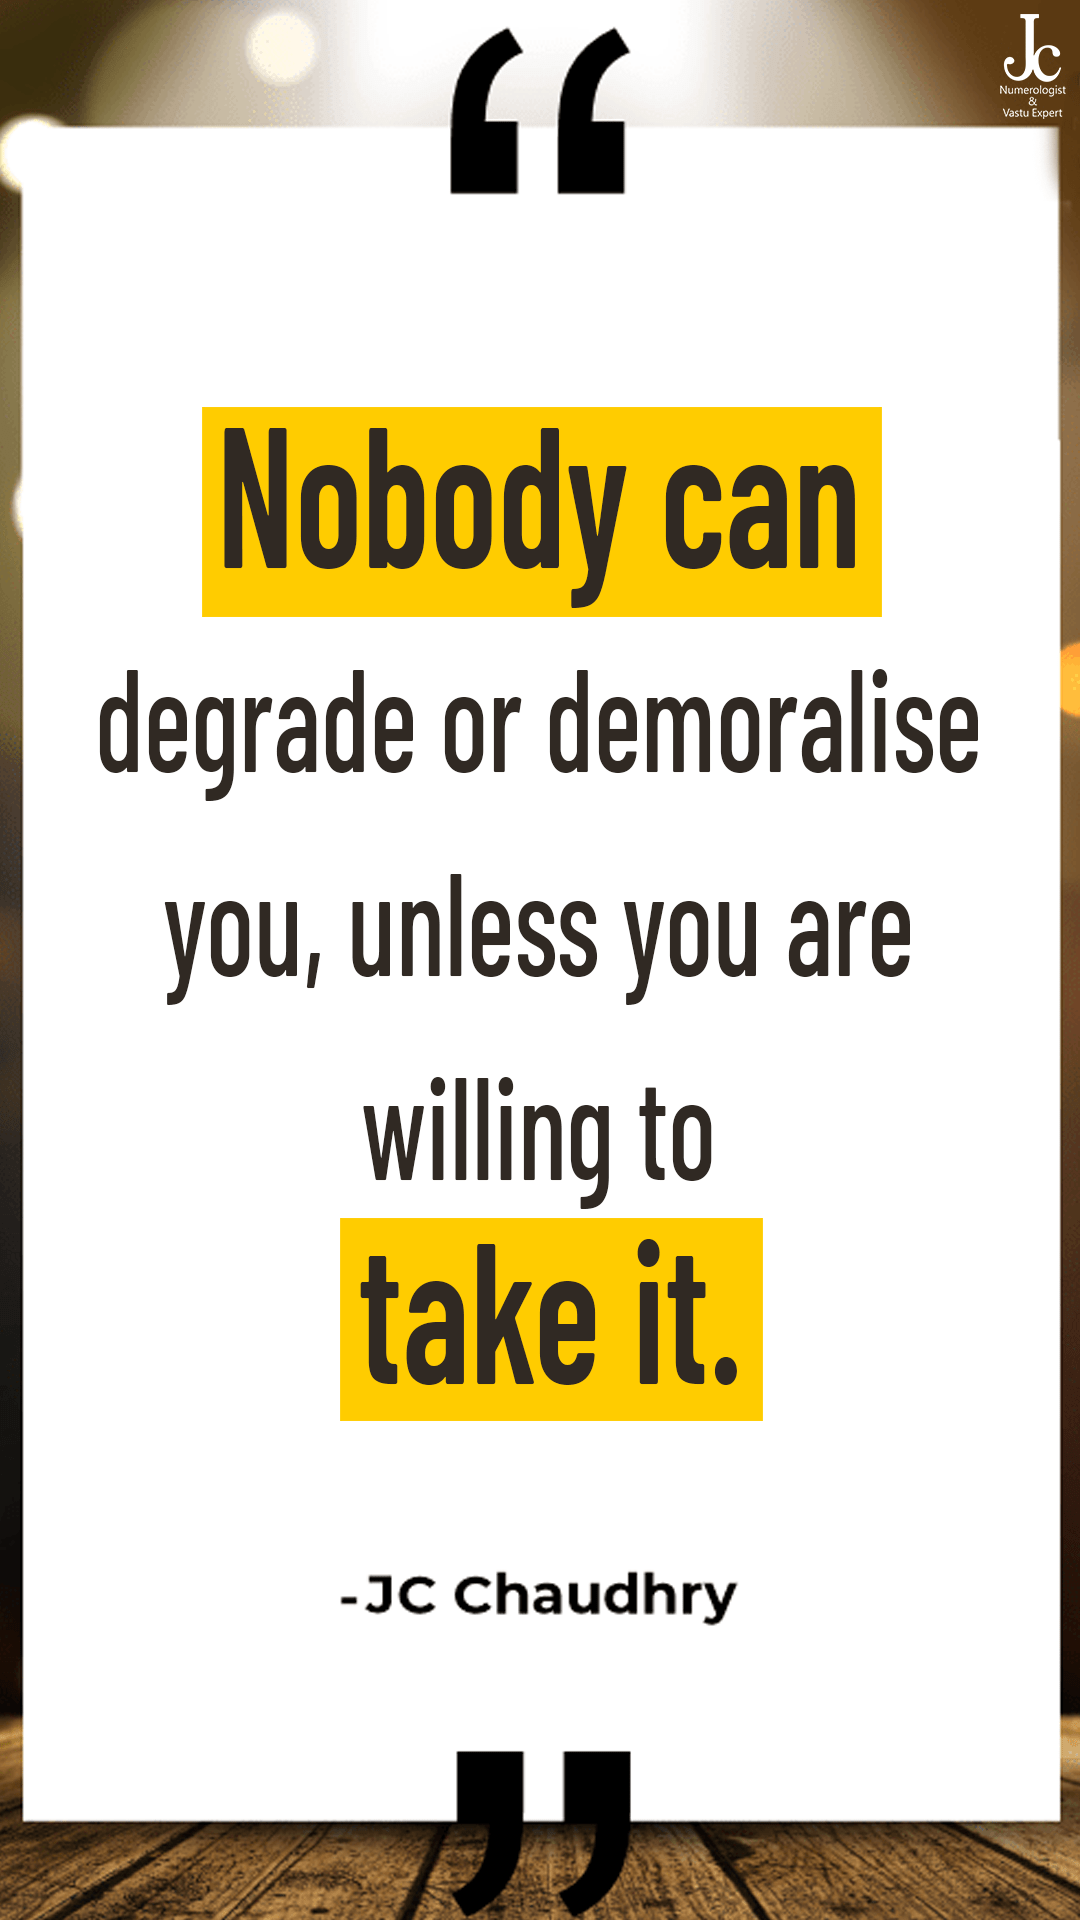 “Nobody can degrade or demoralise you, unless you are willing to take it.”